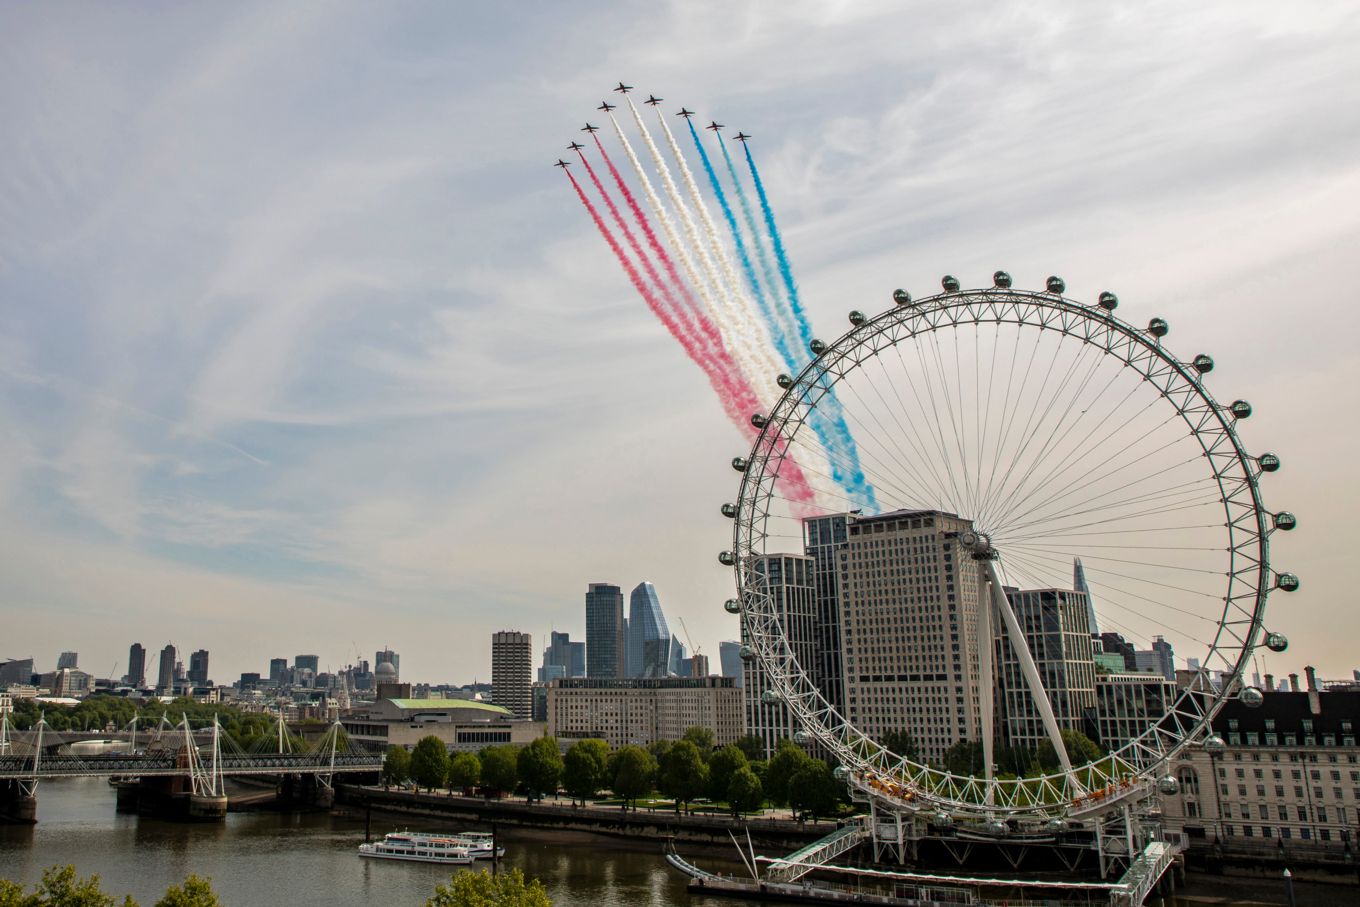 The Red Arrows conduct a fly past over London this morning as part of the 75th Anniversary of Victory in Europe.